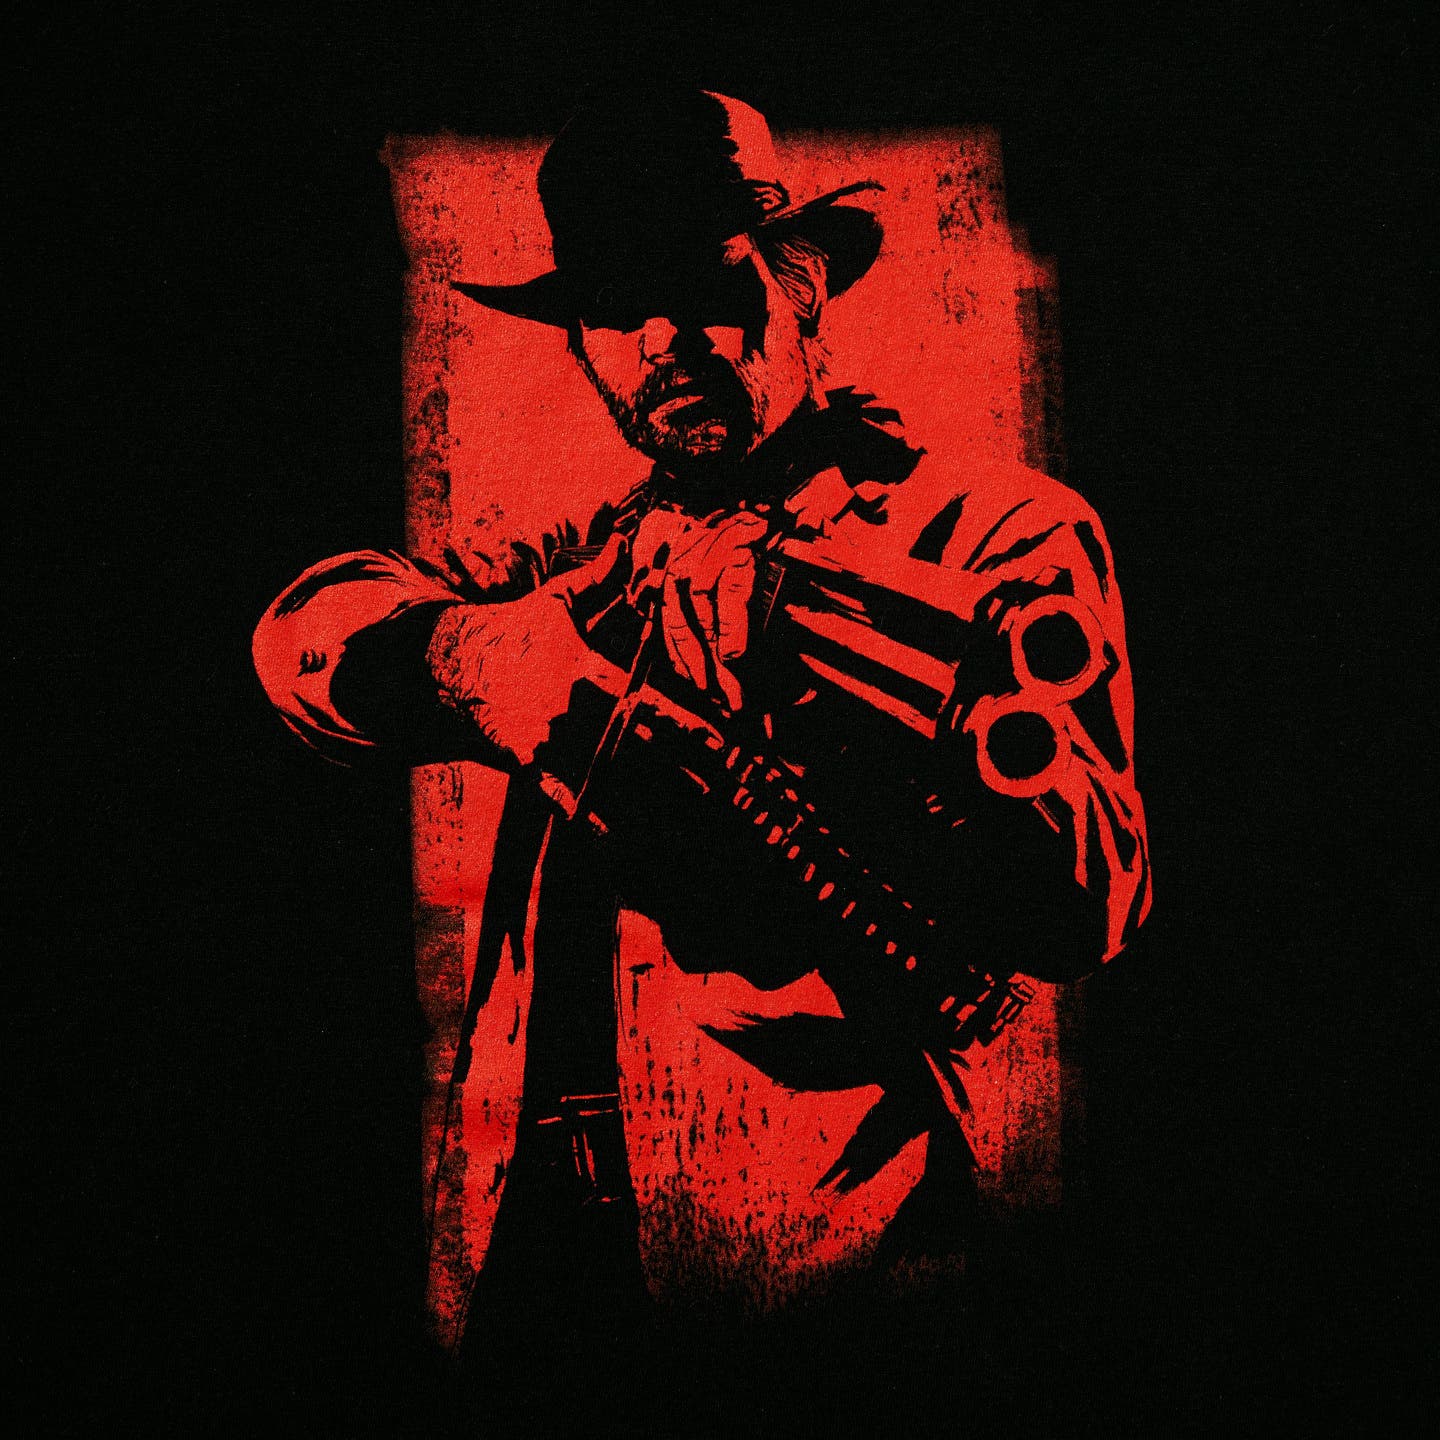 Image of arthur morgan from red dead redemption